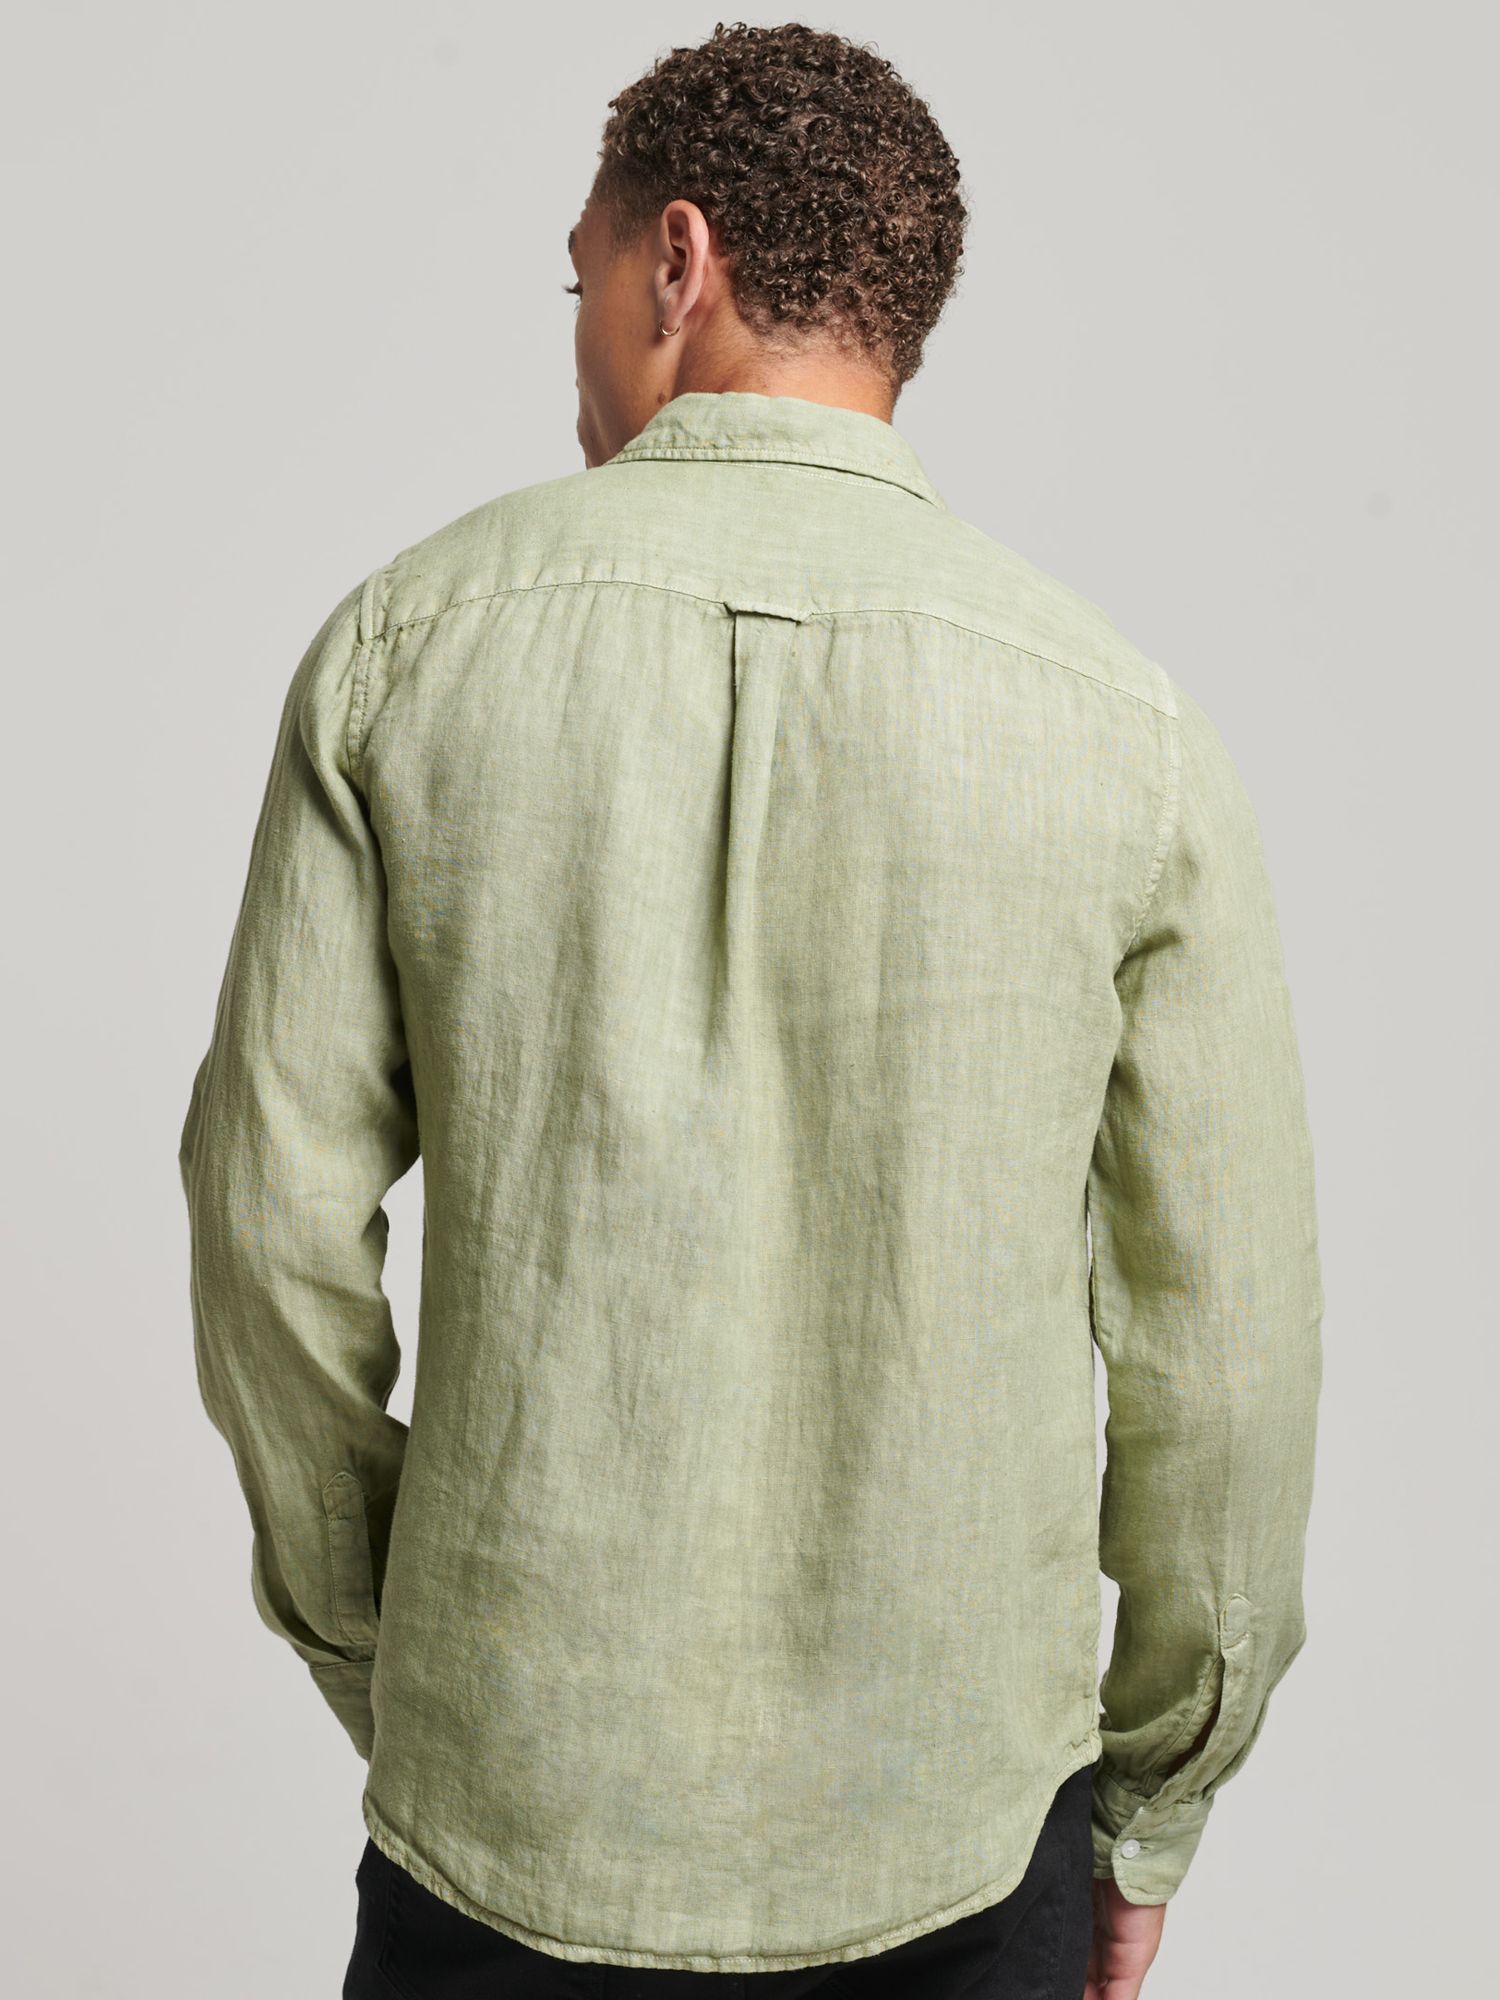 Buy Superdry Casual Linen Long Sleeve Shirt Online at johnlewis.com